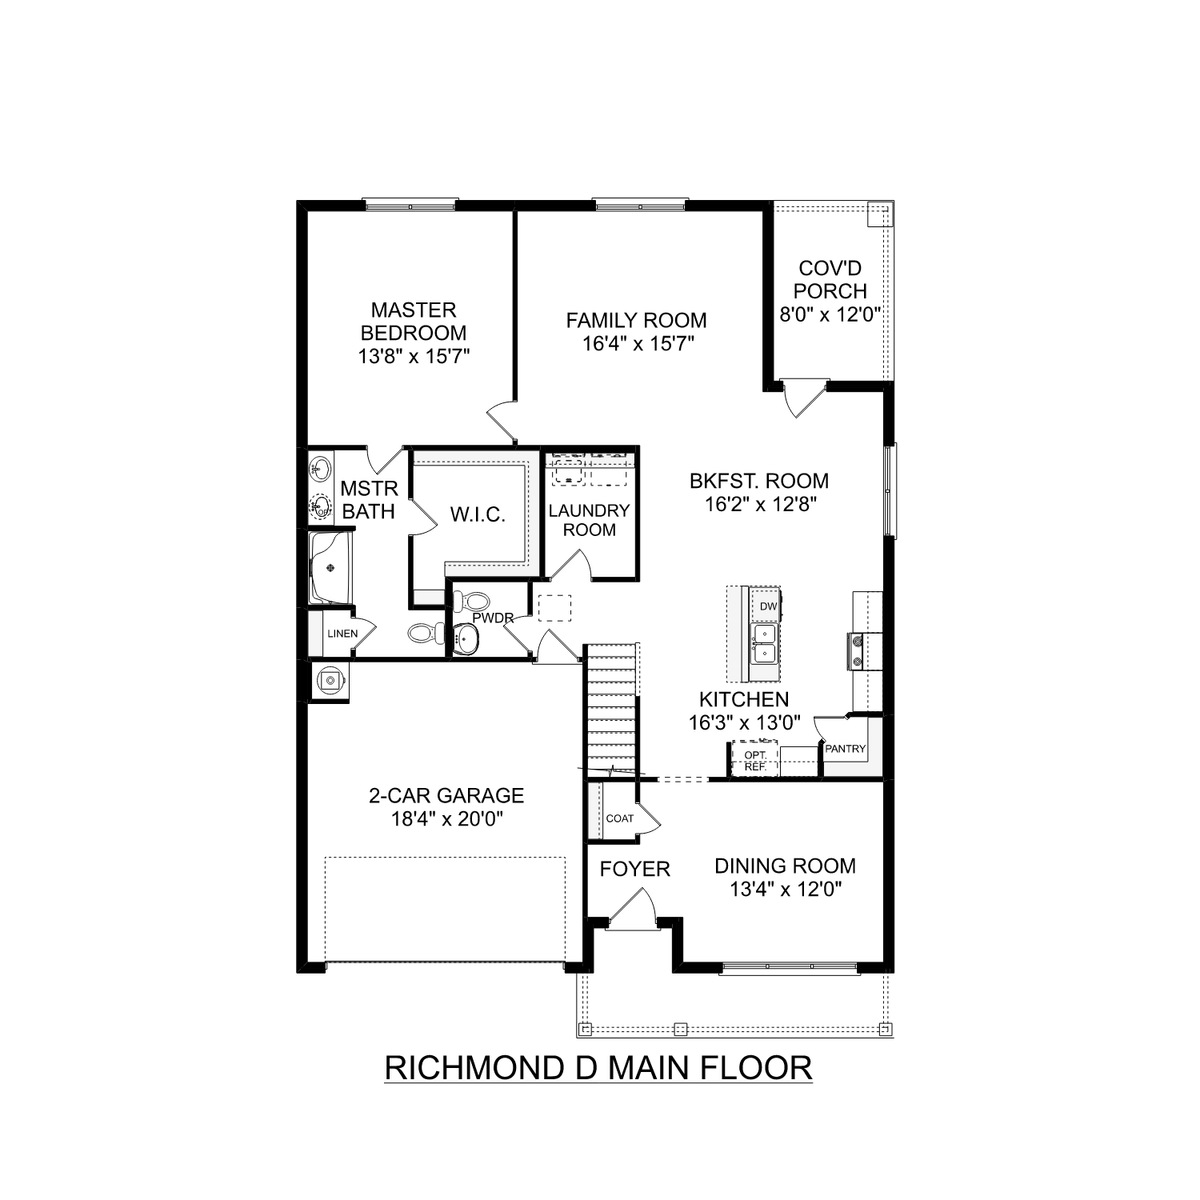 1 - The Richmond D buildable floor plan layout in Davidson Homes' Ivy Hills community.